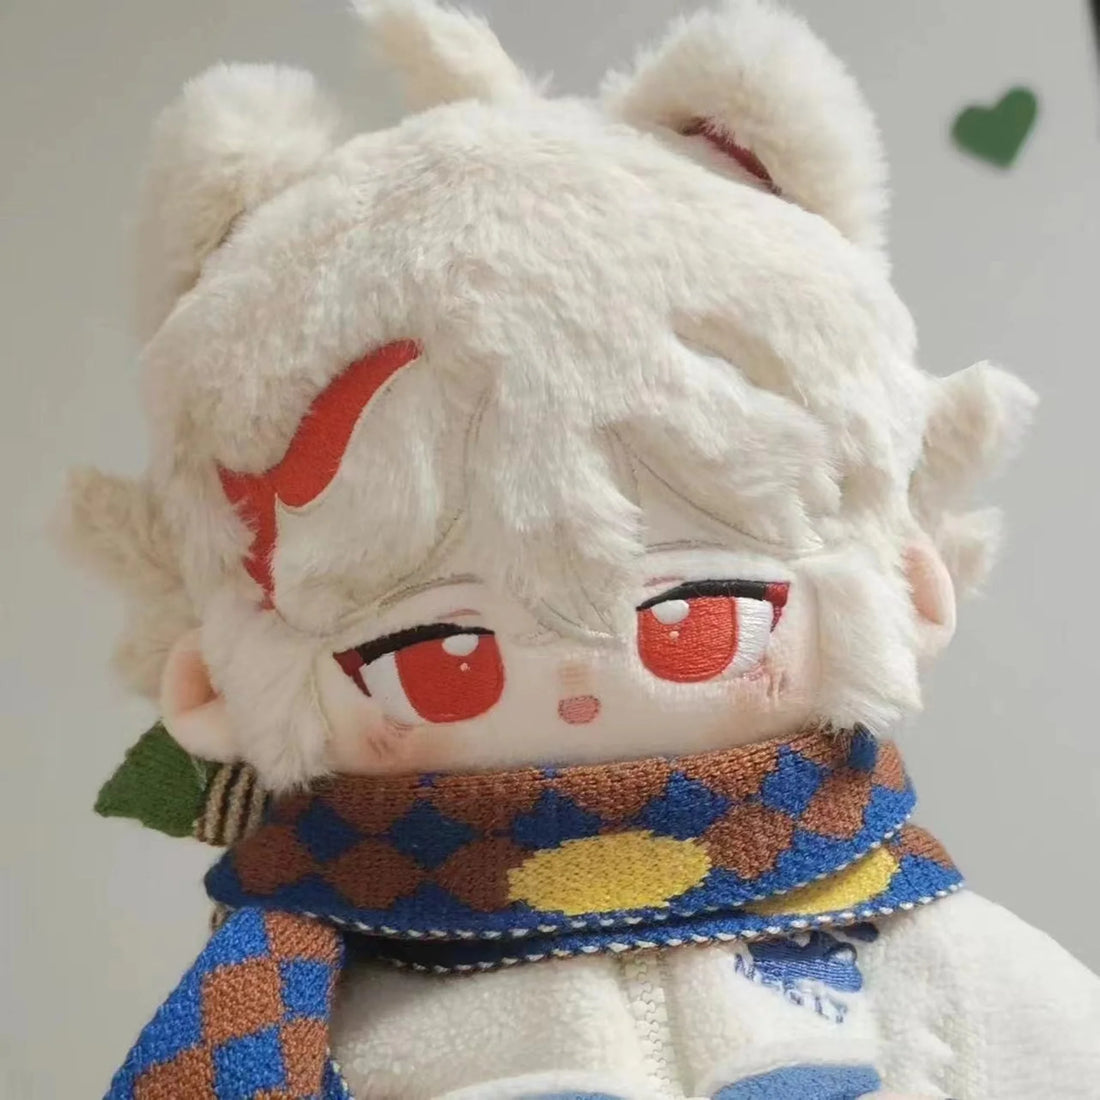 20Cm Kazuha Stuffed Plushie Doll Gifts For Game Fans Collection